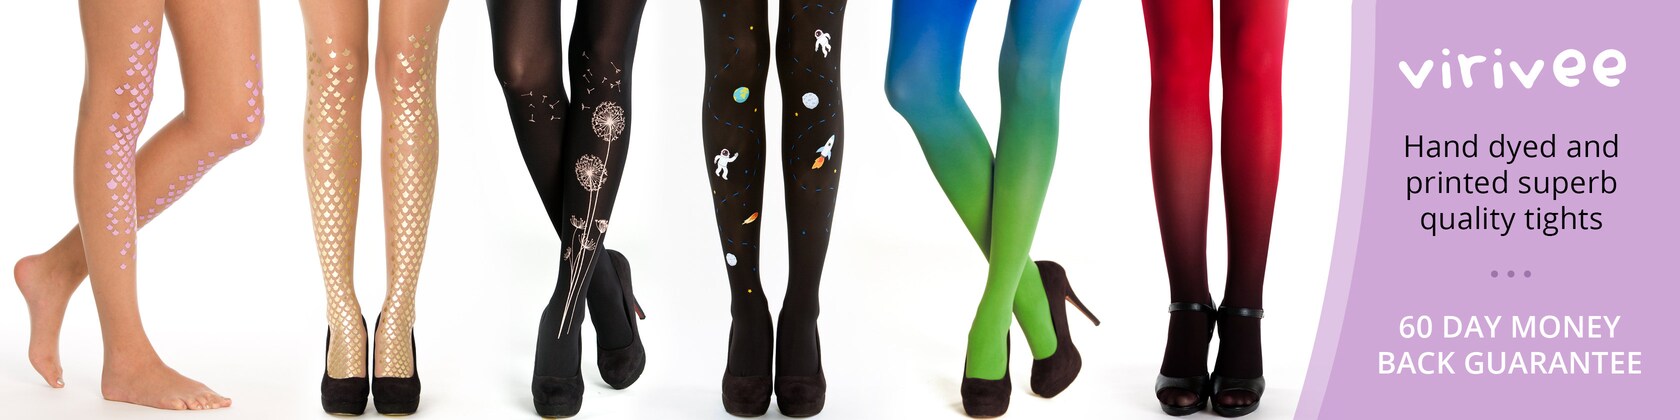 Unique hand dyed and printed tights. Worldwide shipping by virivee